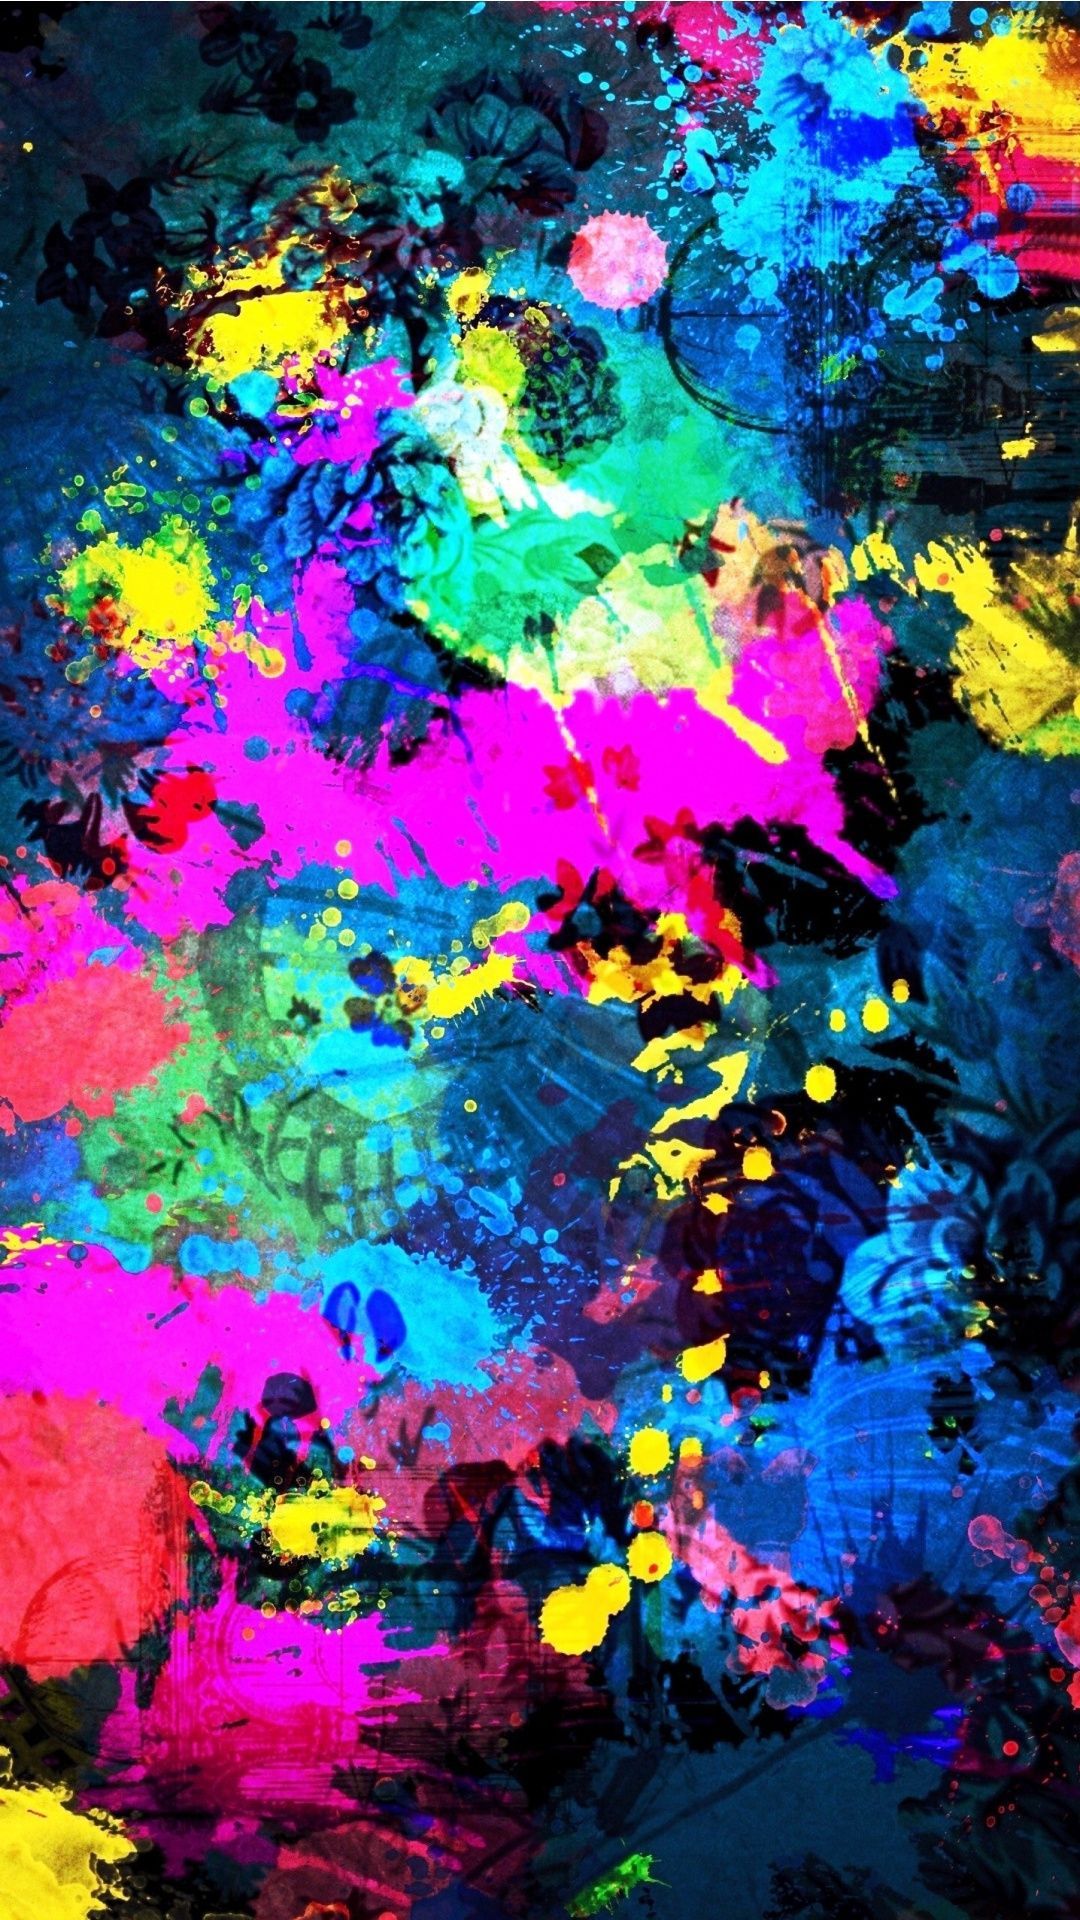 Great 5 Colorful Wallpaper High Definition For Your Android or iPhone Wallpaper #android #iphone #wal. Artistic wallpaper, Graffiti wallpaper, Android wallpaper